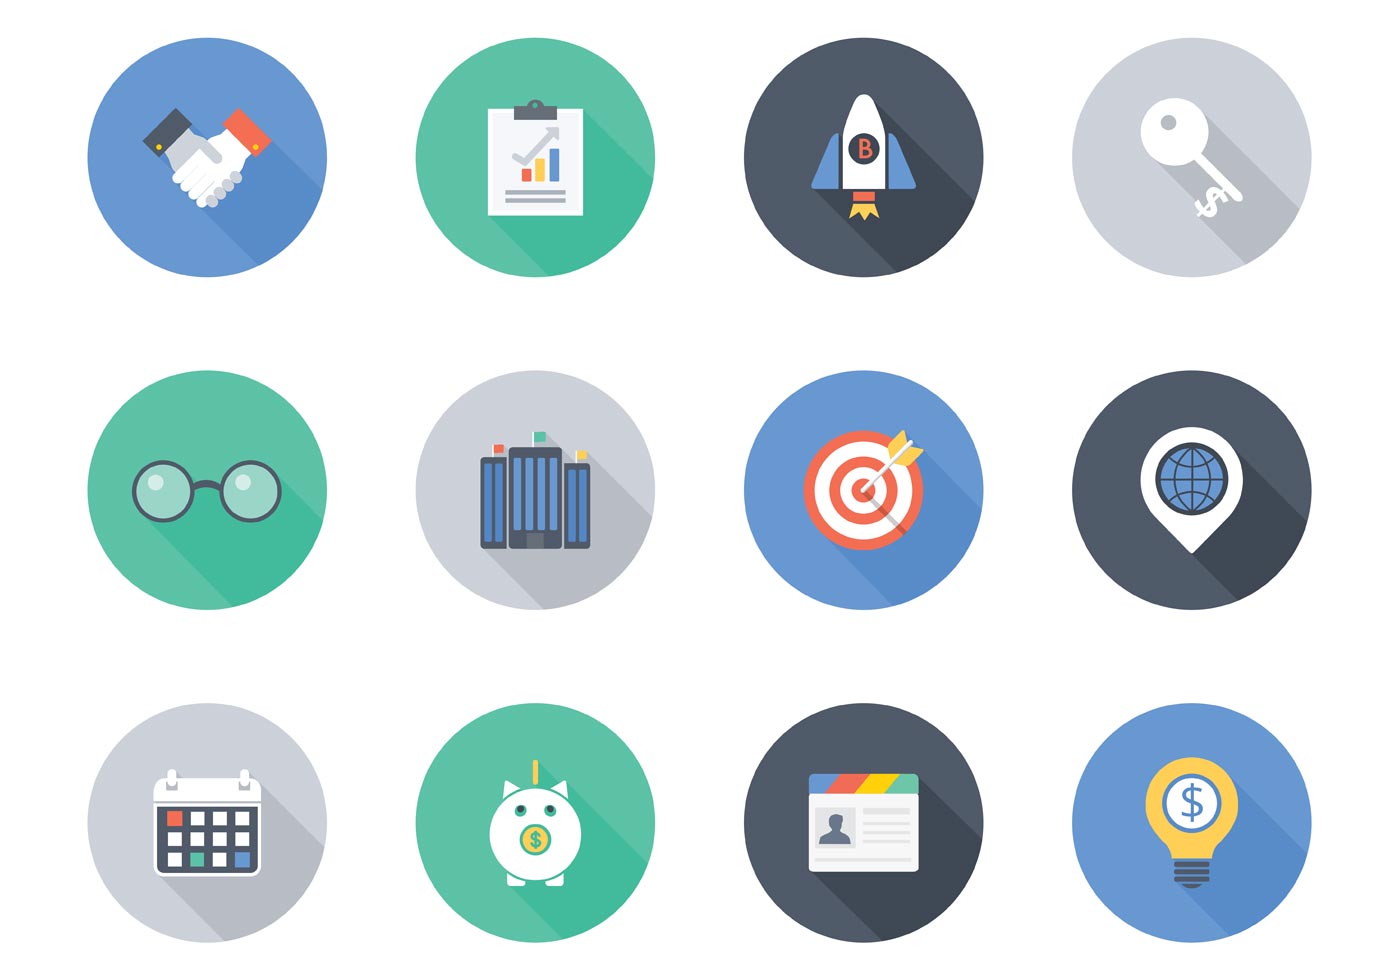 Download Flat Business Vector Icons - Download Free Vector Art ...